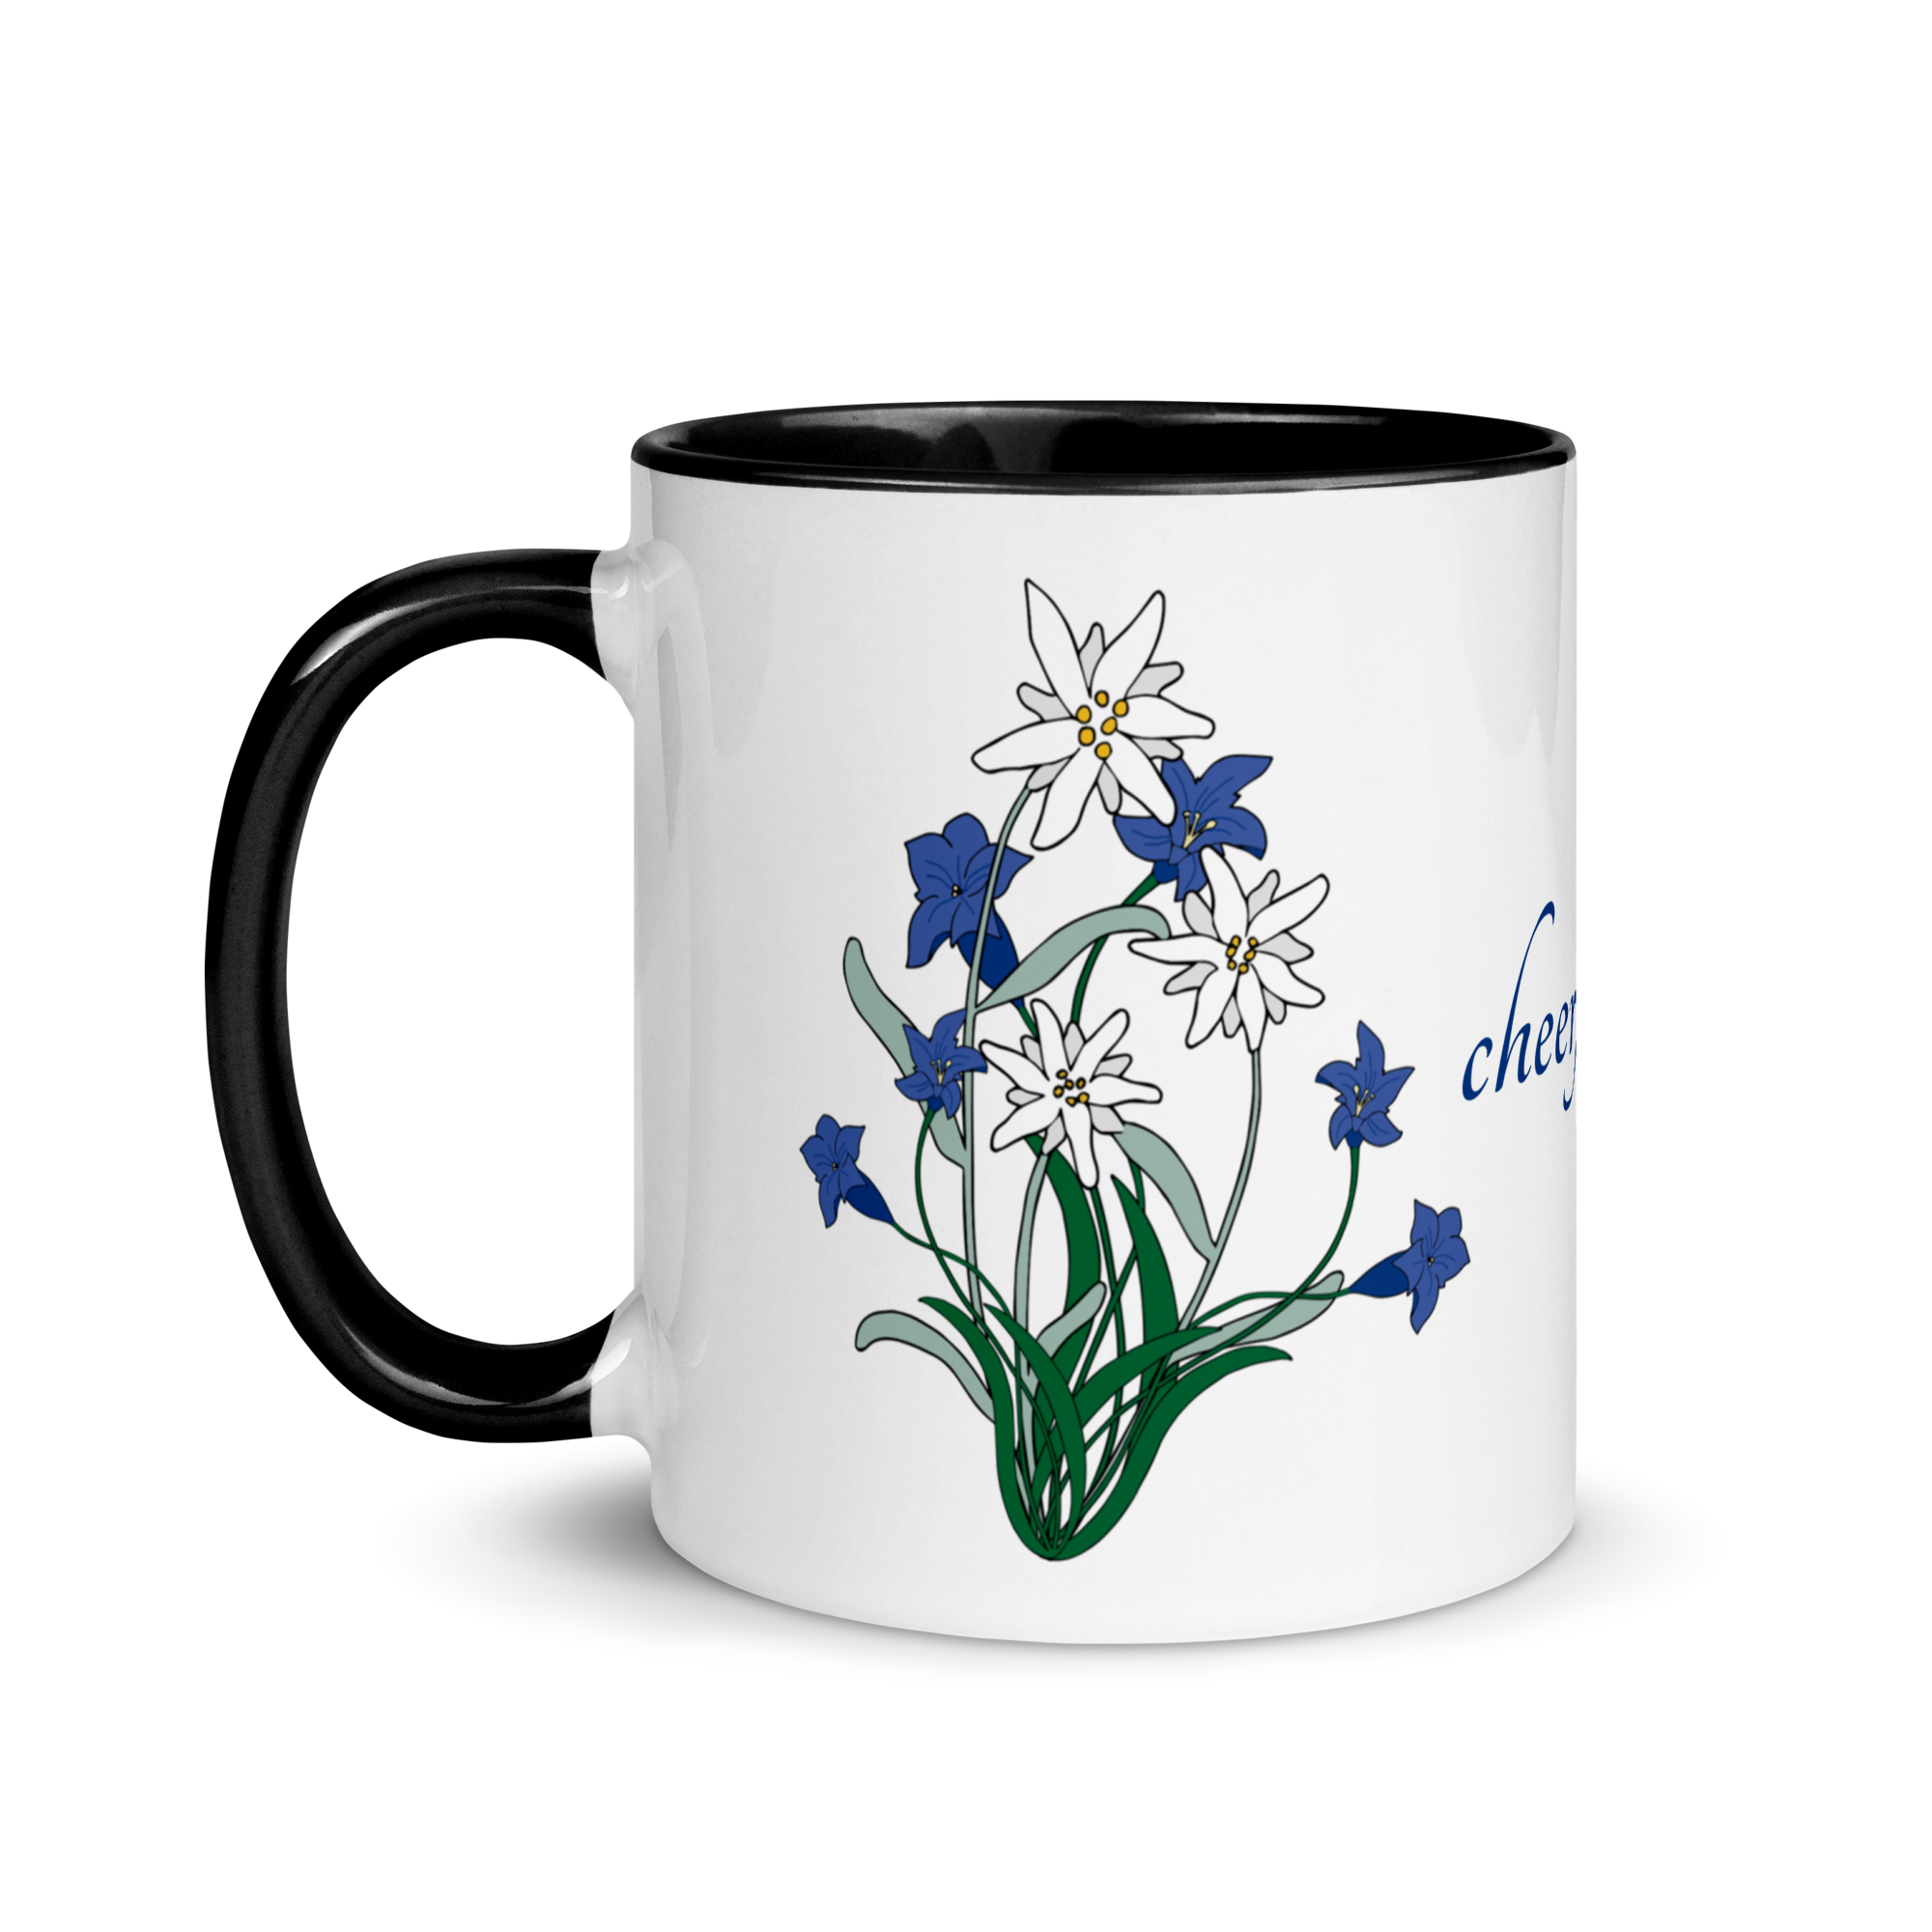 Edelweiss and Gentian Cheerfulness Mug with Black Inside